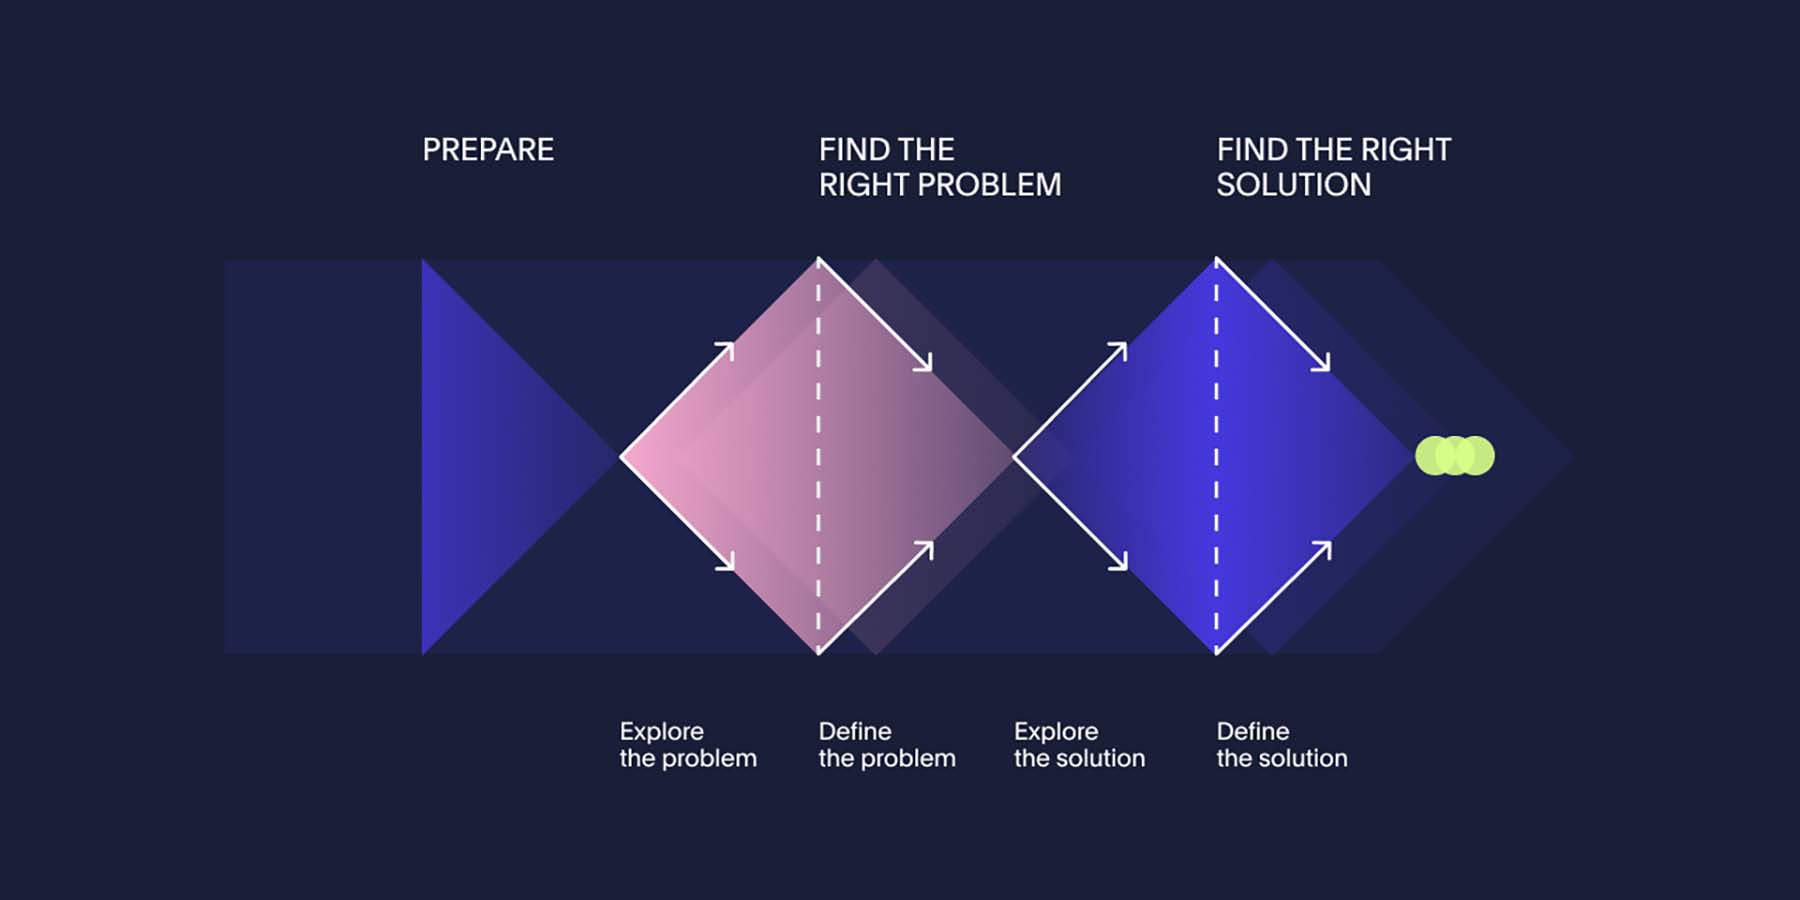 the double-diamond approach to exploring, defining, and solving the problem